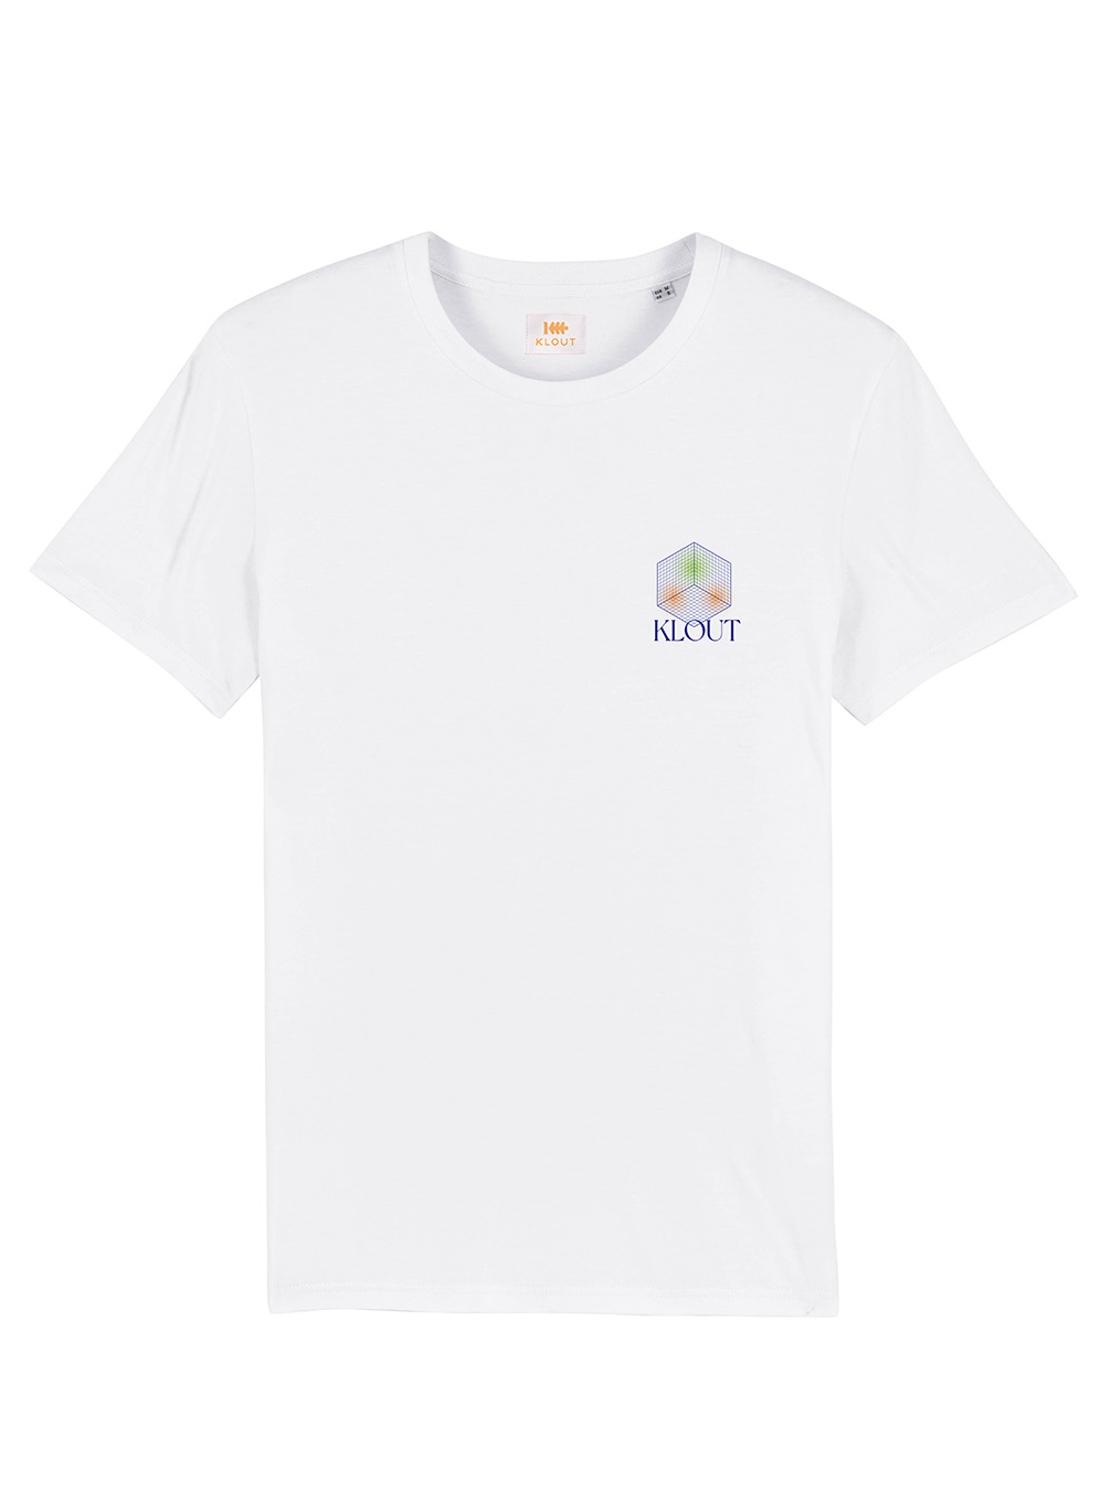 T-Shirt Klout Aesthetic Bianco Uomo e Donna